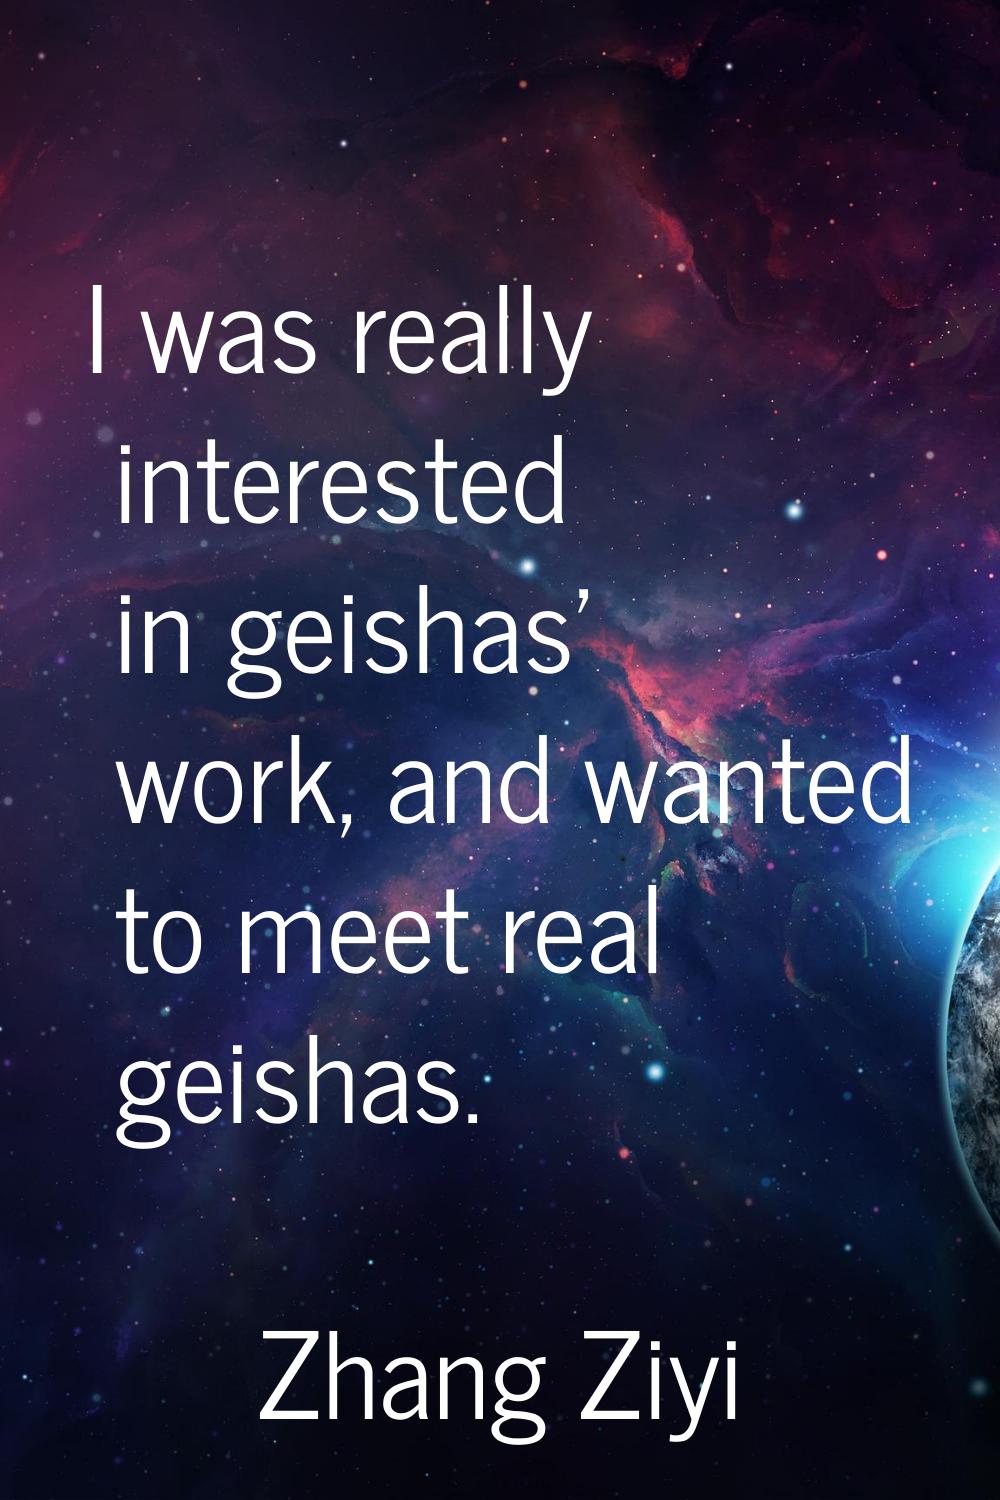 I was really interested in geishas' work, and wanted to meet real geishas.